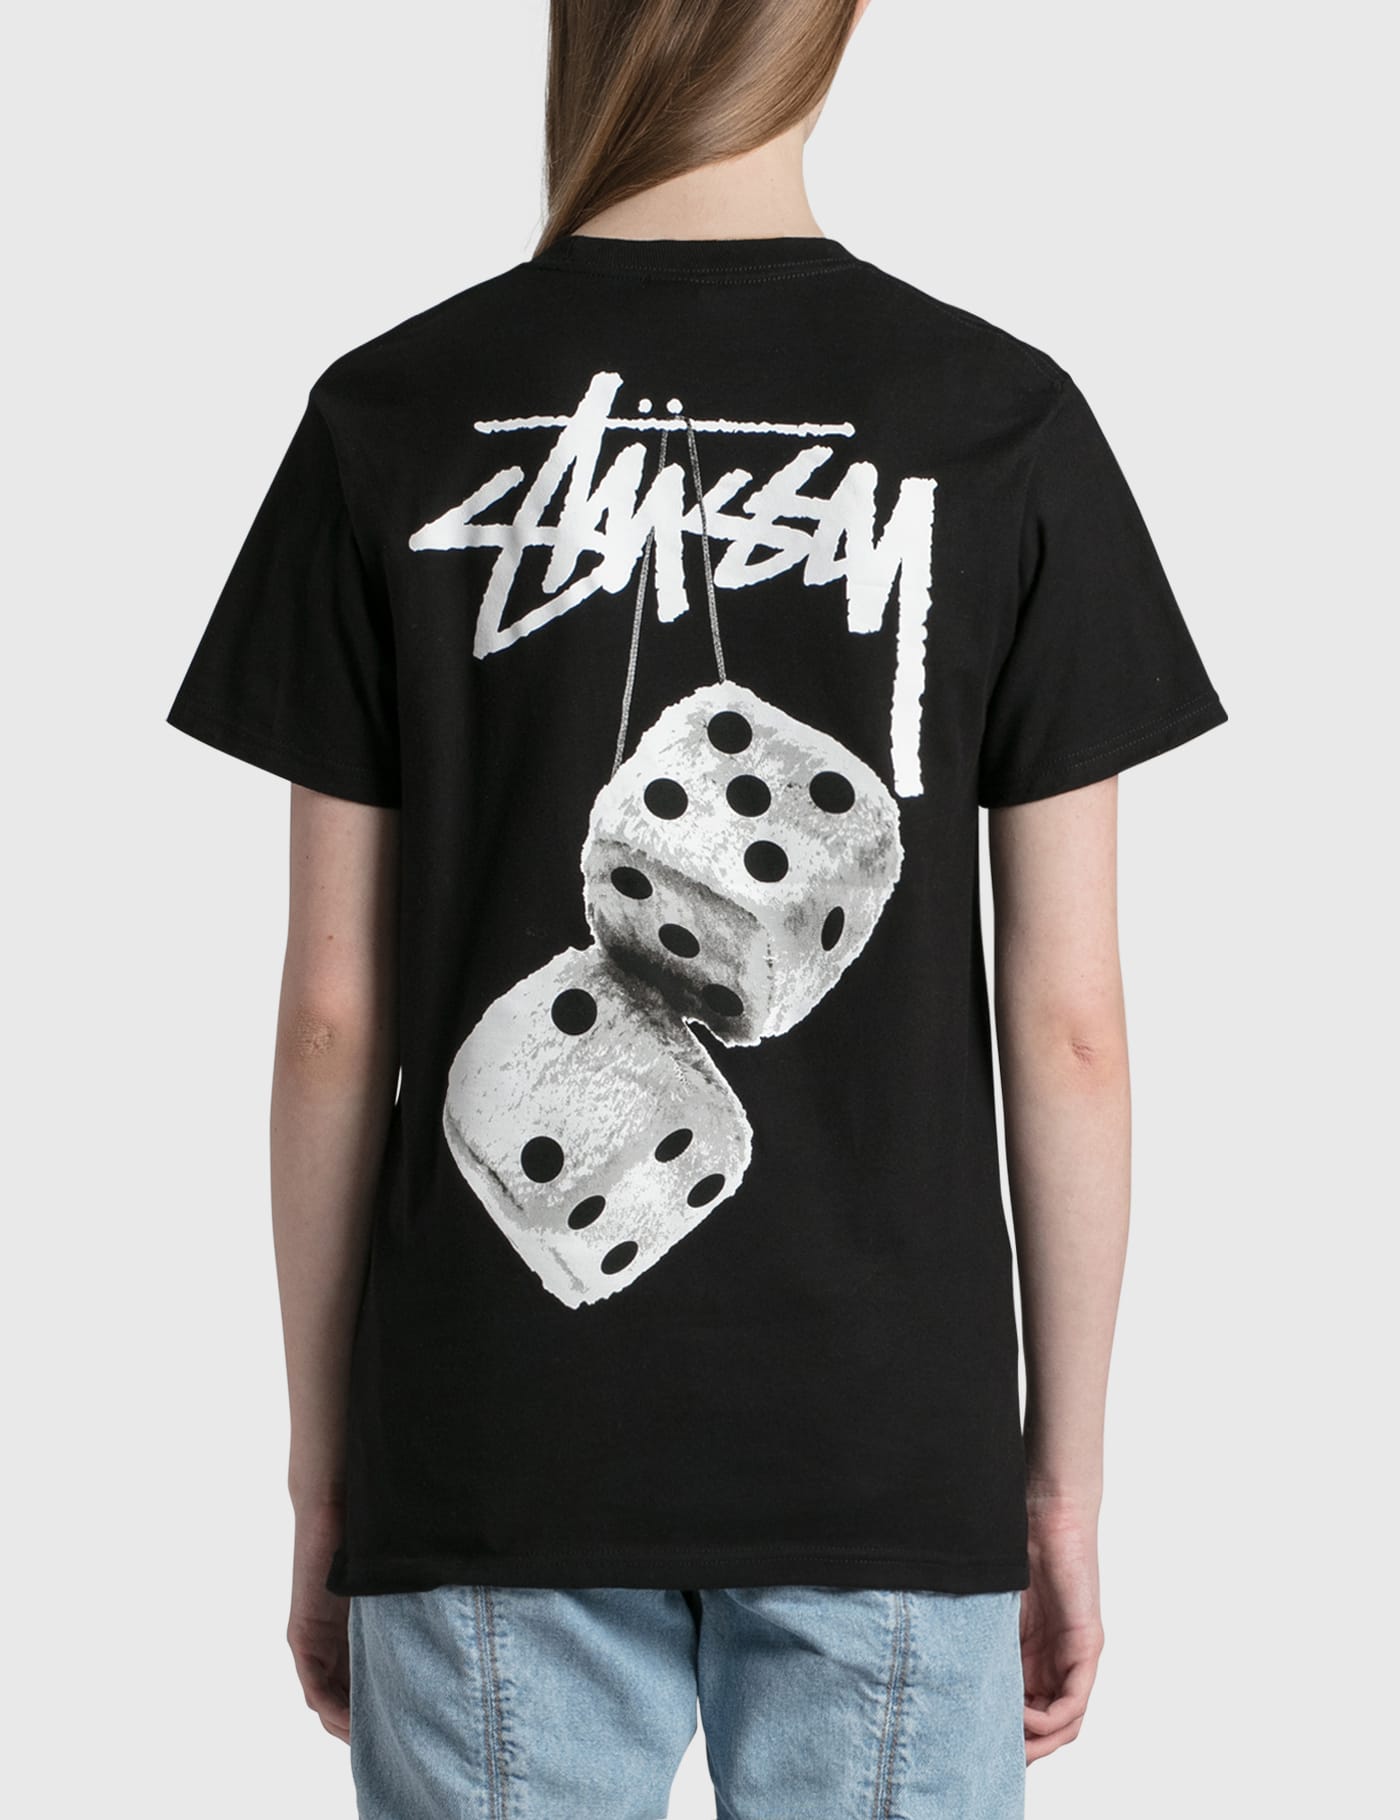 Stüssy - Fuzzy Dice T-shirt | HBX - Globally Curated Fashion and